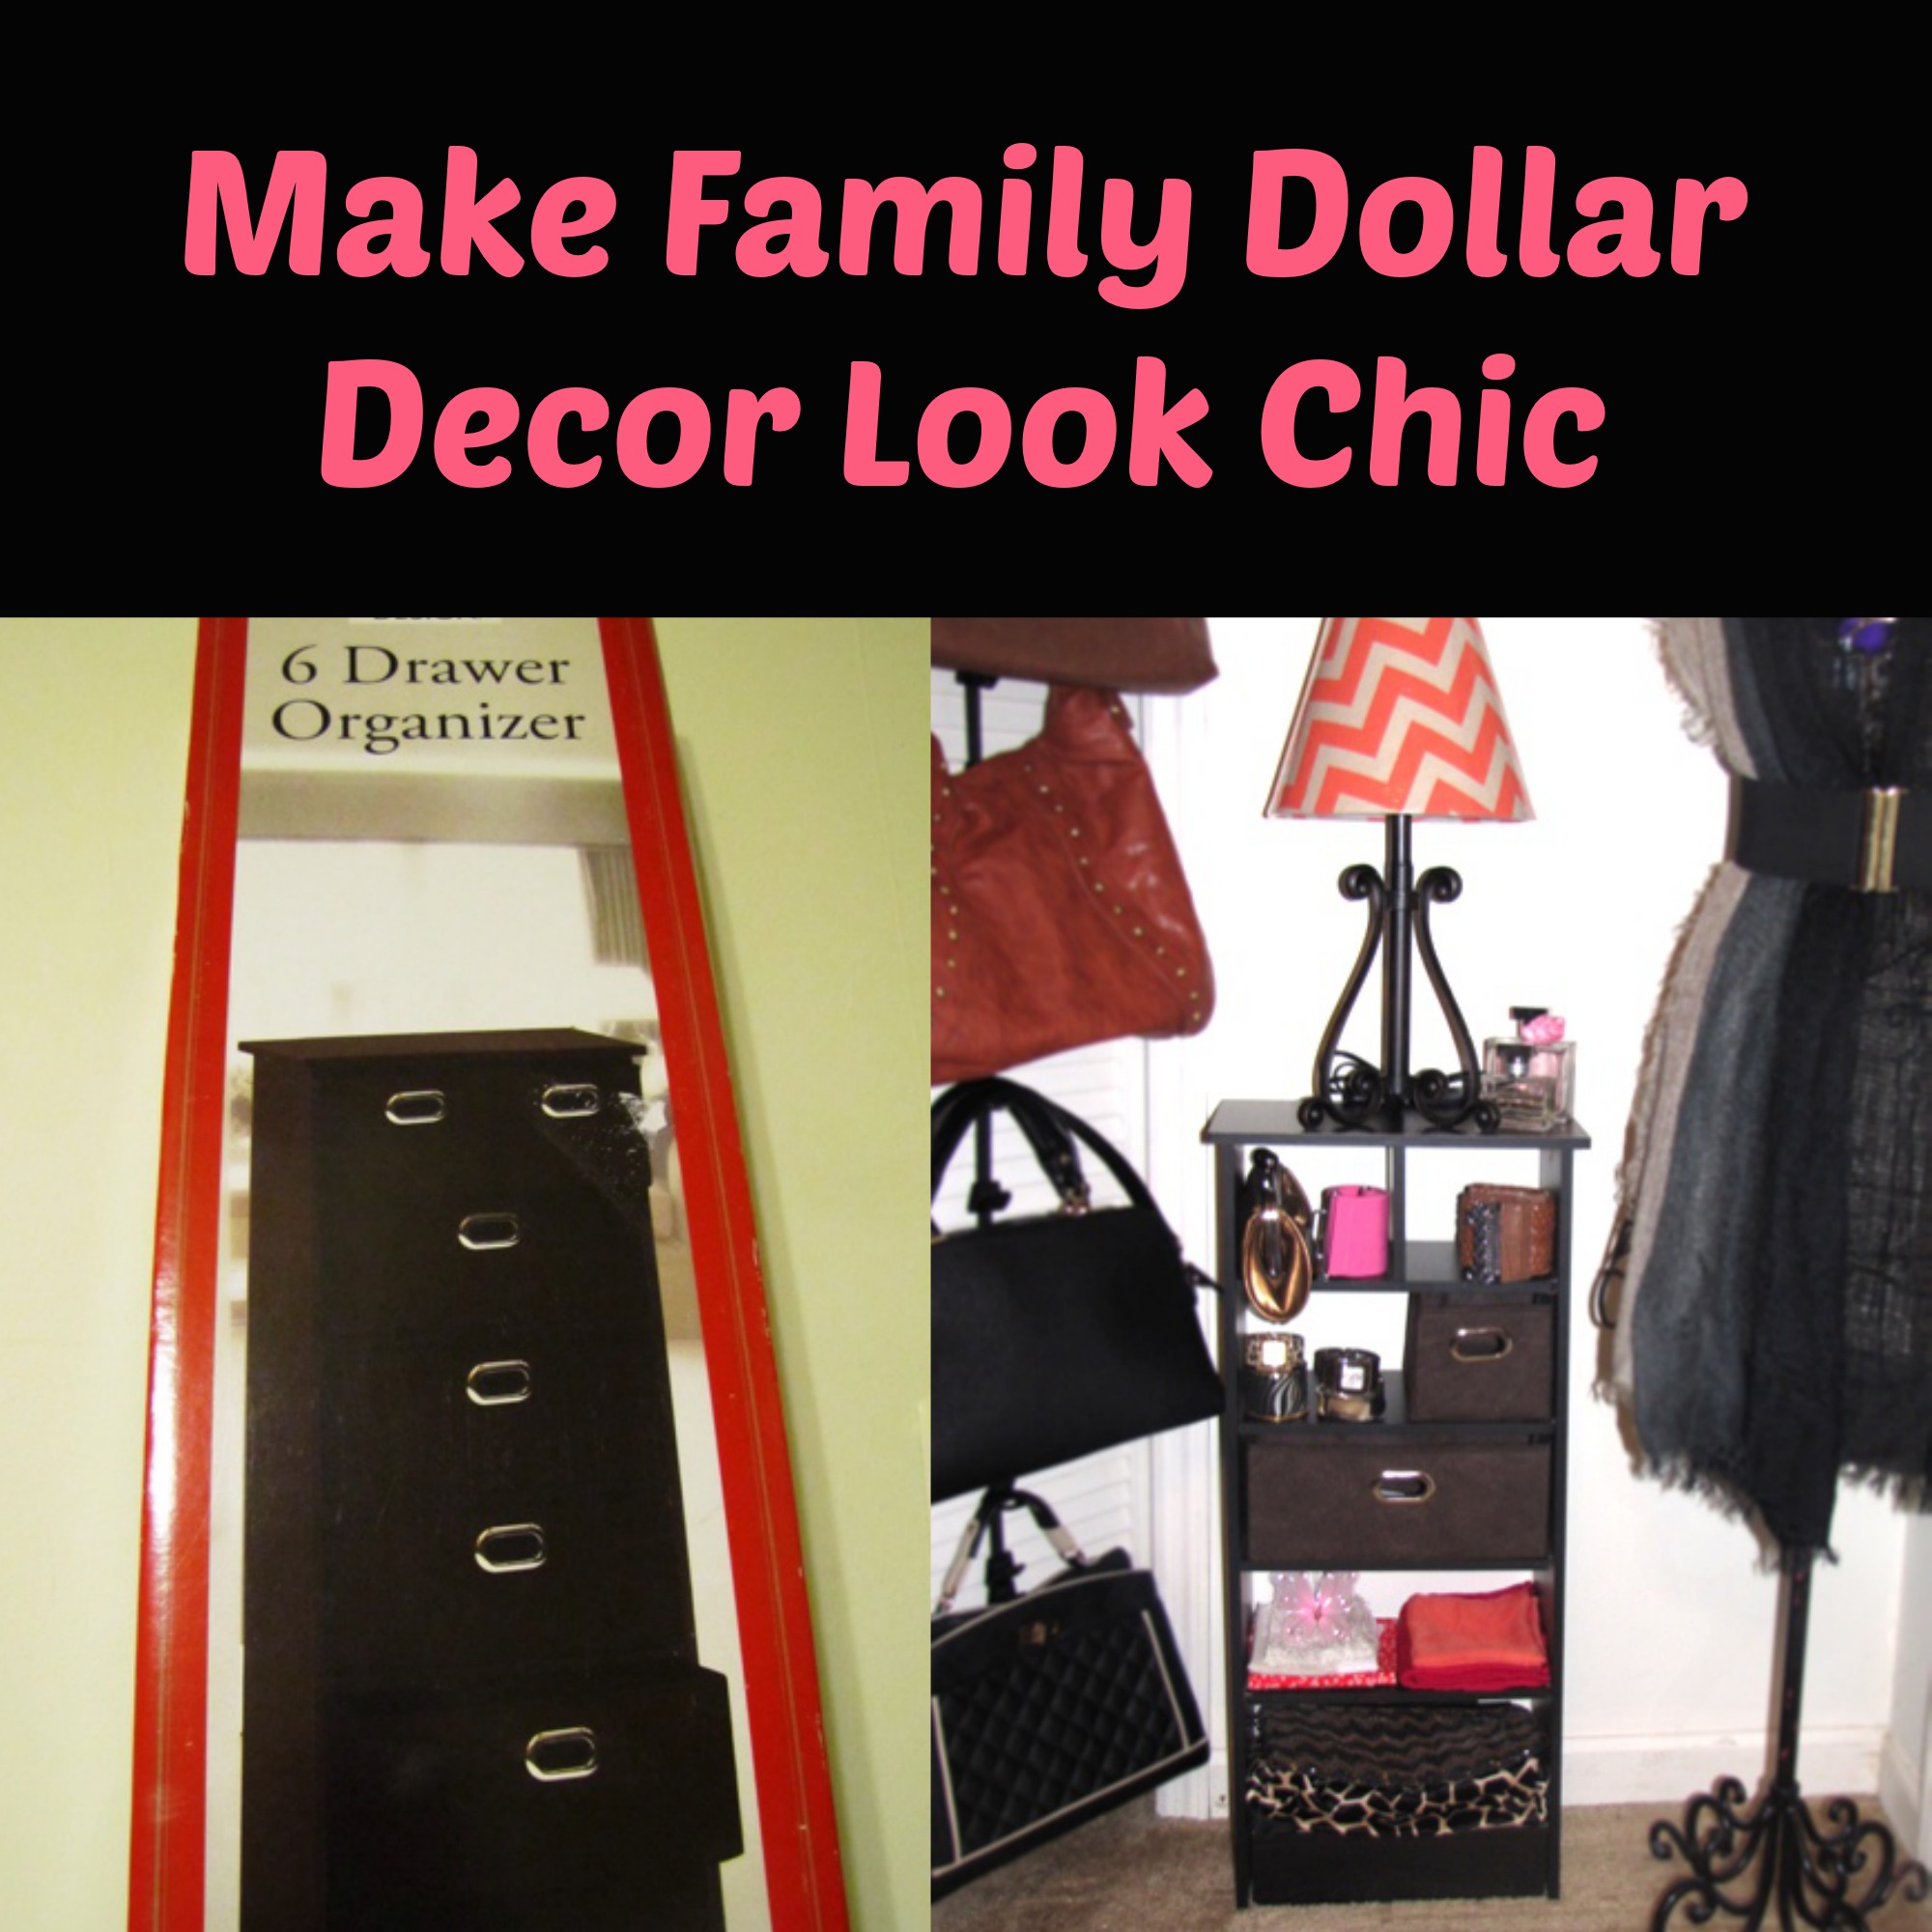 How to Make Family Dollar Decor Look Chic Looking Fly on